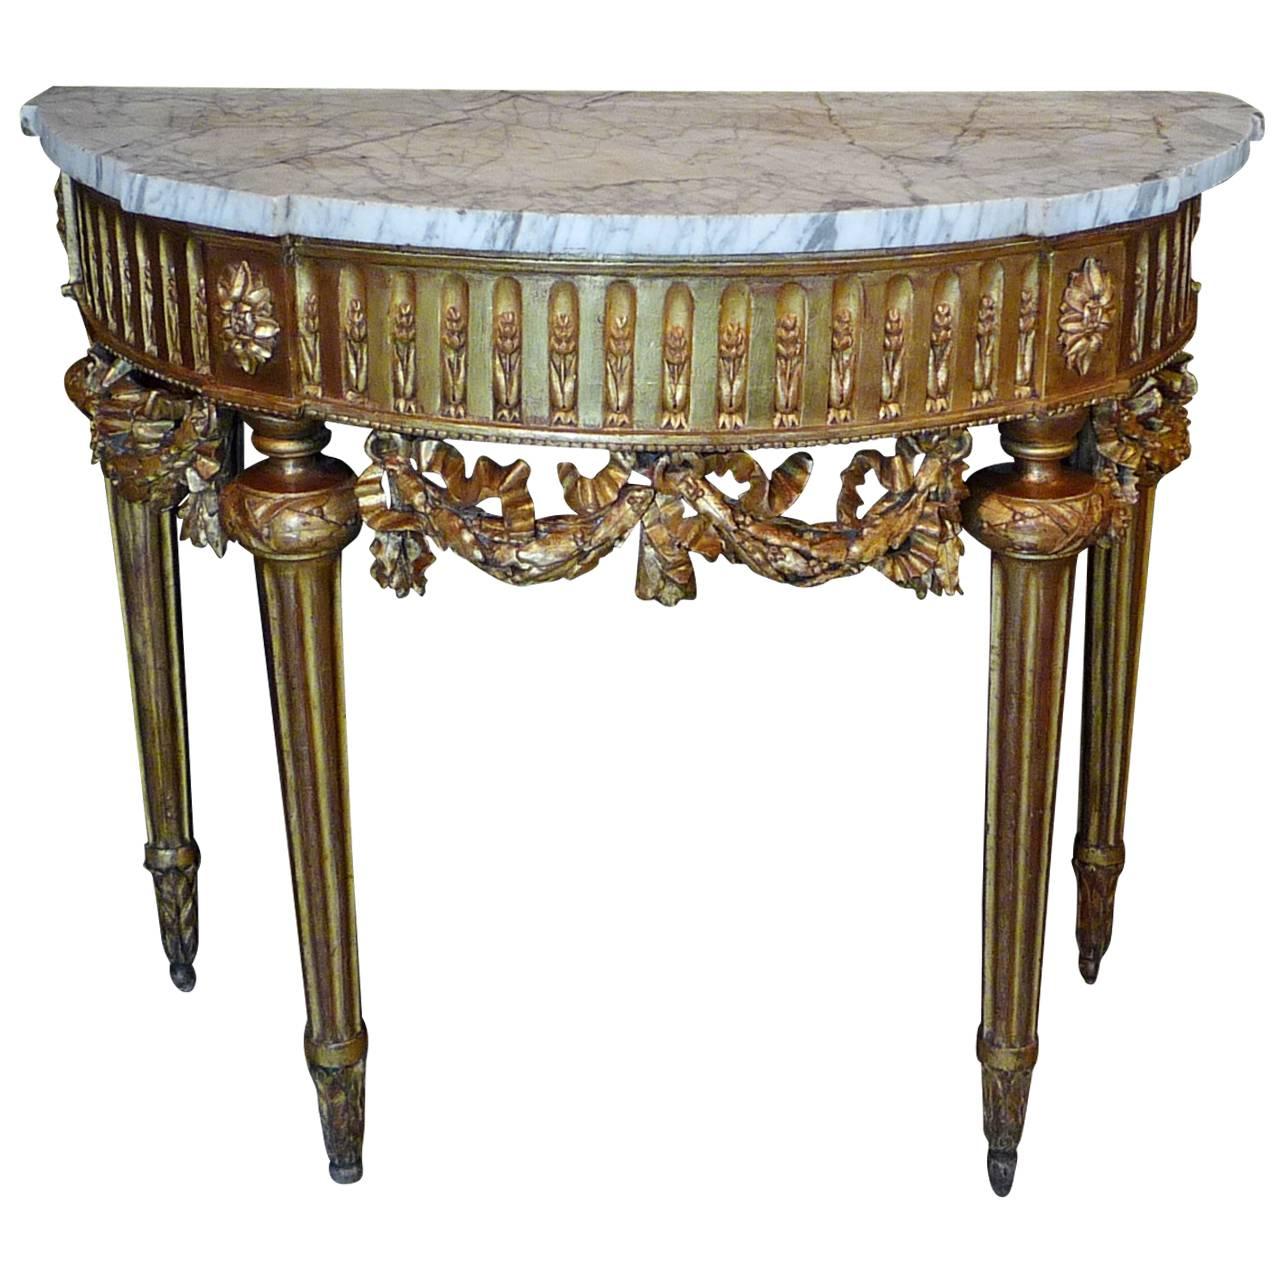 French Louis XVI Period Carved and Giltwood Demilune Console Table, 1780 For Sale